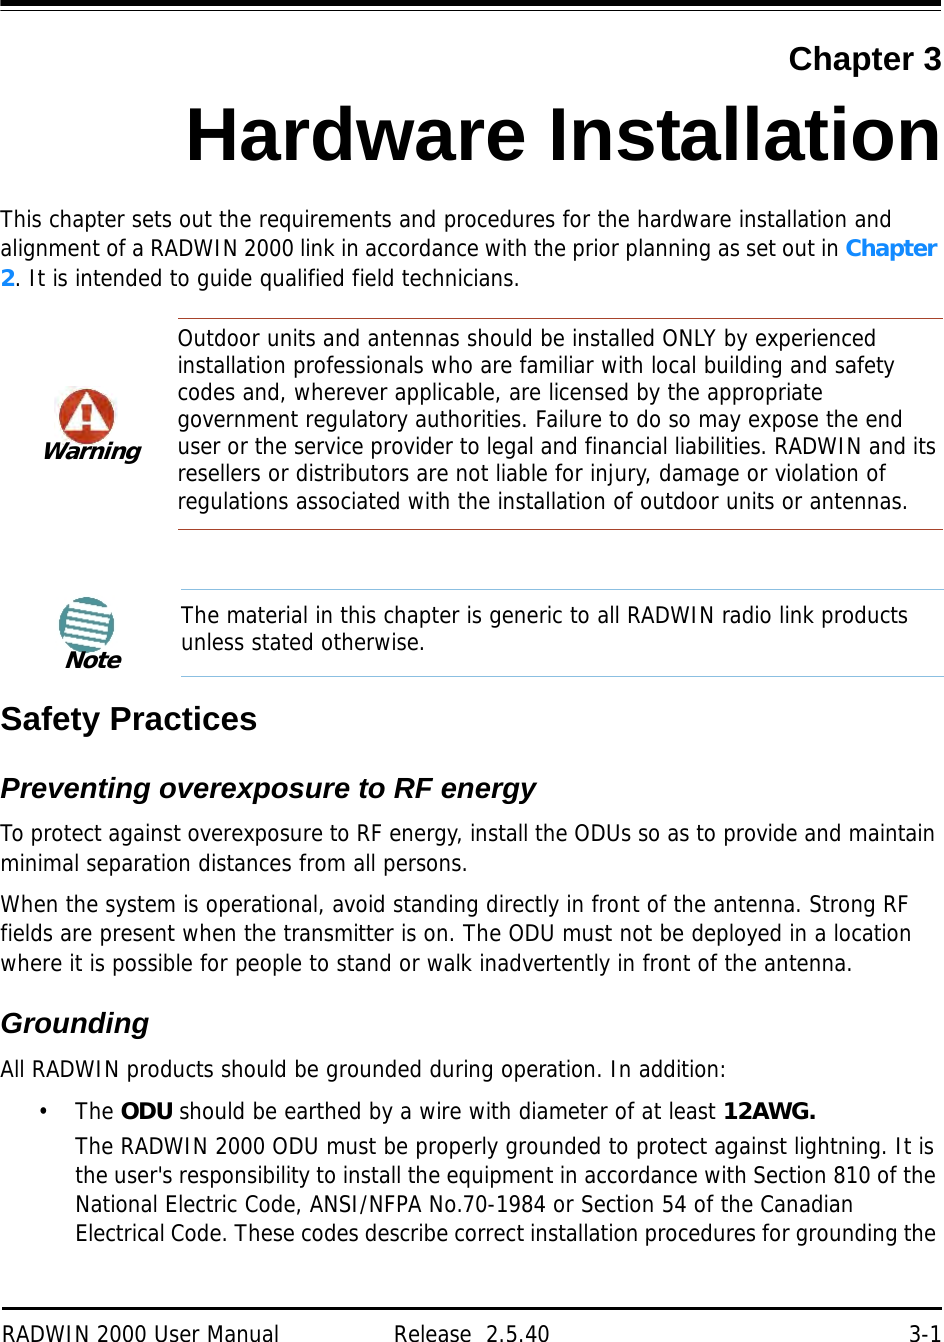 RADWIN 2000 User Manual Release  2.5.40 3-1Chapter 3Hardware InstallationThis chapter sets out the requirements and procedures for the hardware installation and alignment of a RADWIN 2000 link in accordance with the prior planning as set out in Chapter 2. It is intended to guide qualified field technicians.Safety PracticesPreventing overexposure to RF energyTo protect against overexposure to RF energy, install the ODUs so as to provide and maintain minimal separation distances from all persons.When the system is operational, avoid standing directly in front of the antenna. Strong RF fields are present when the transmitter is on. The ODU must not be deployed in a location where it is possible for people to stand or walk inadvertently in front of the antenna.GroundingAll RADWIN products should be grounded during operation. In addition:•The ODU should be earthed by a wire with diameter of at least 12AWG.The RADWIN 2000 ODU must be properly grounded to protect against lightning. It is the user&apos;s responsibility to install the equipment in accordance with Section 810 of the National Electric Code, ANSI/NFPA No.70-1984 or Section 54 of the Canadian Electrical Code. These codes describe correct installation procedures for grounding the WarningOutdoor units and antennas should be installed ONLY by experienced installation professionals who are familiar with local building and safety codes and, wherever applicable, are licensed by the appropriate government regulatory authorities. Failure to do so may expose the end user or the service provider to legal and financial liabilities. RADWIN and its resellers or distributors are not liable for injury, damage or violation of regulations associated with the installation of outdoor units or antennas.NoteThe material in this chapter is generic to all RADWIN radio link products unless stated otherwise.